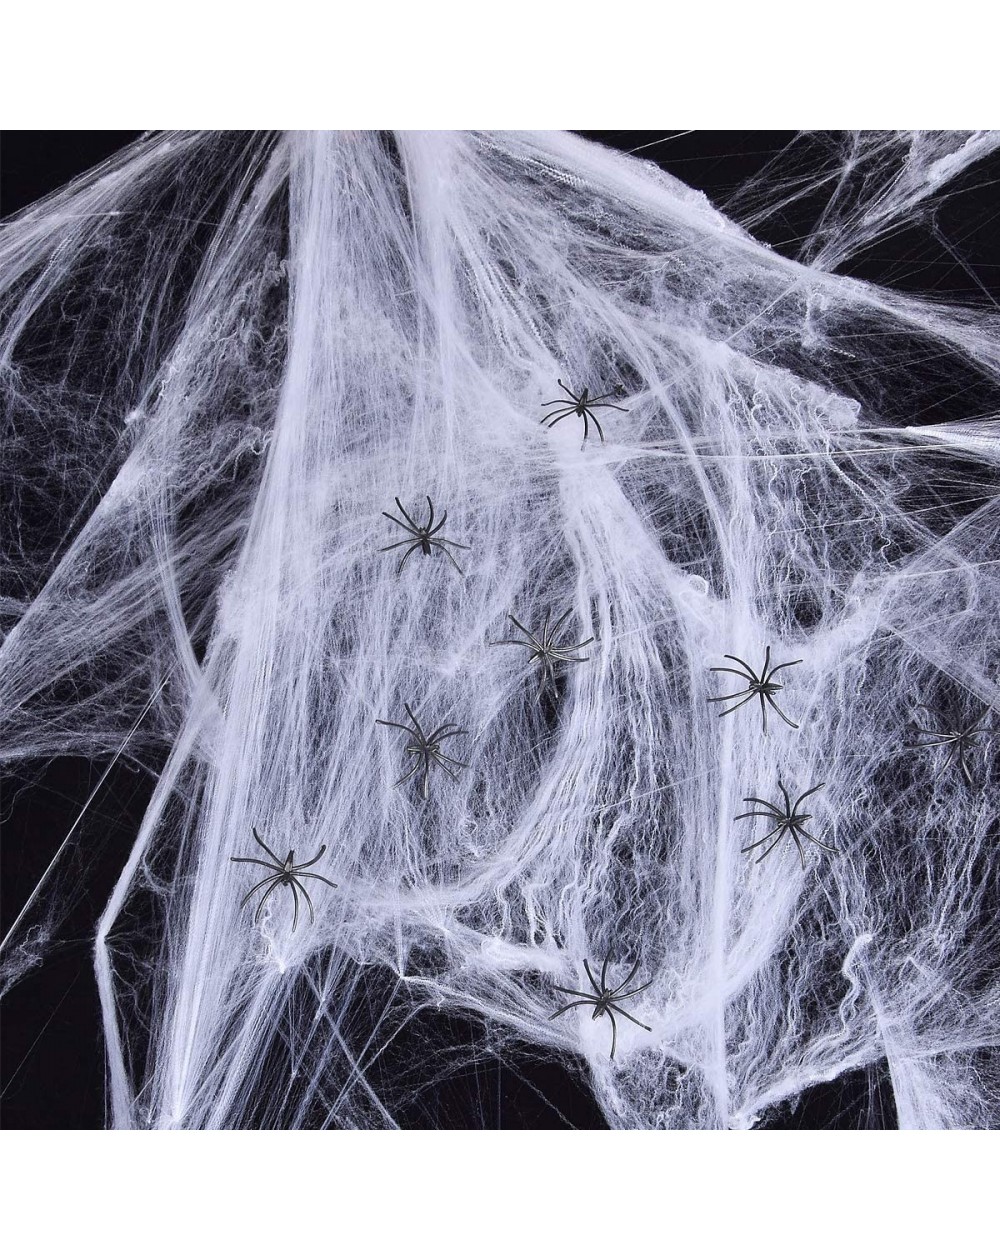 Party Packs 5-Pack Halloween Stretch Spider Webs with 100 Spiders Party Decorations Props 1000 sqft - CQ19DEG00TA $13.20